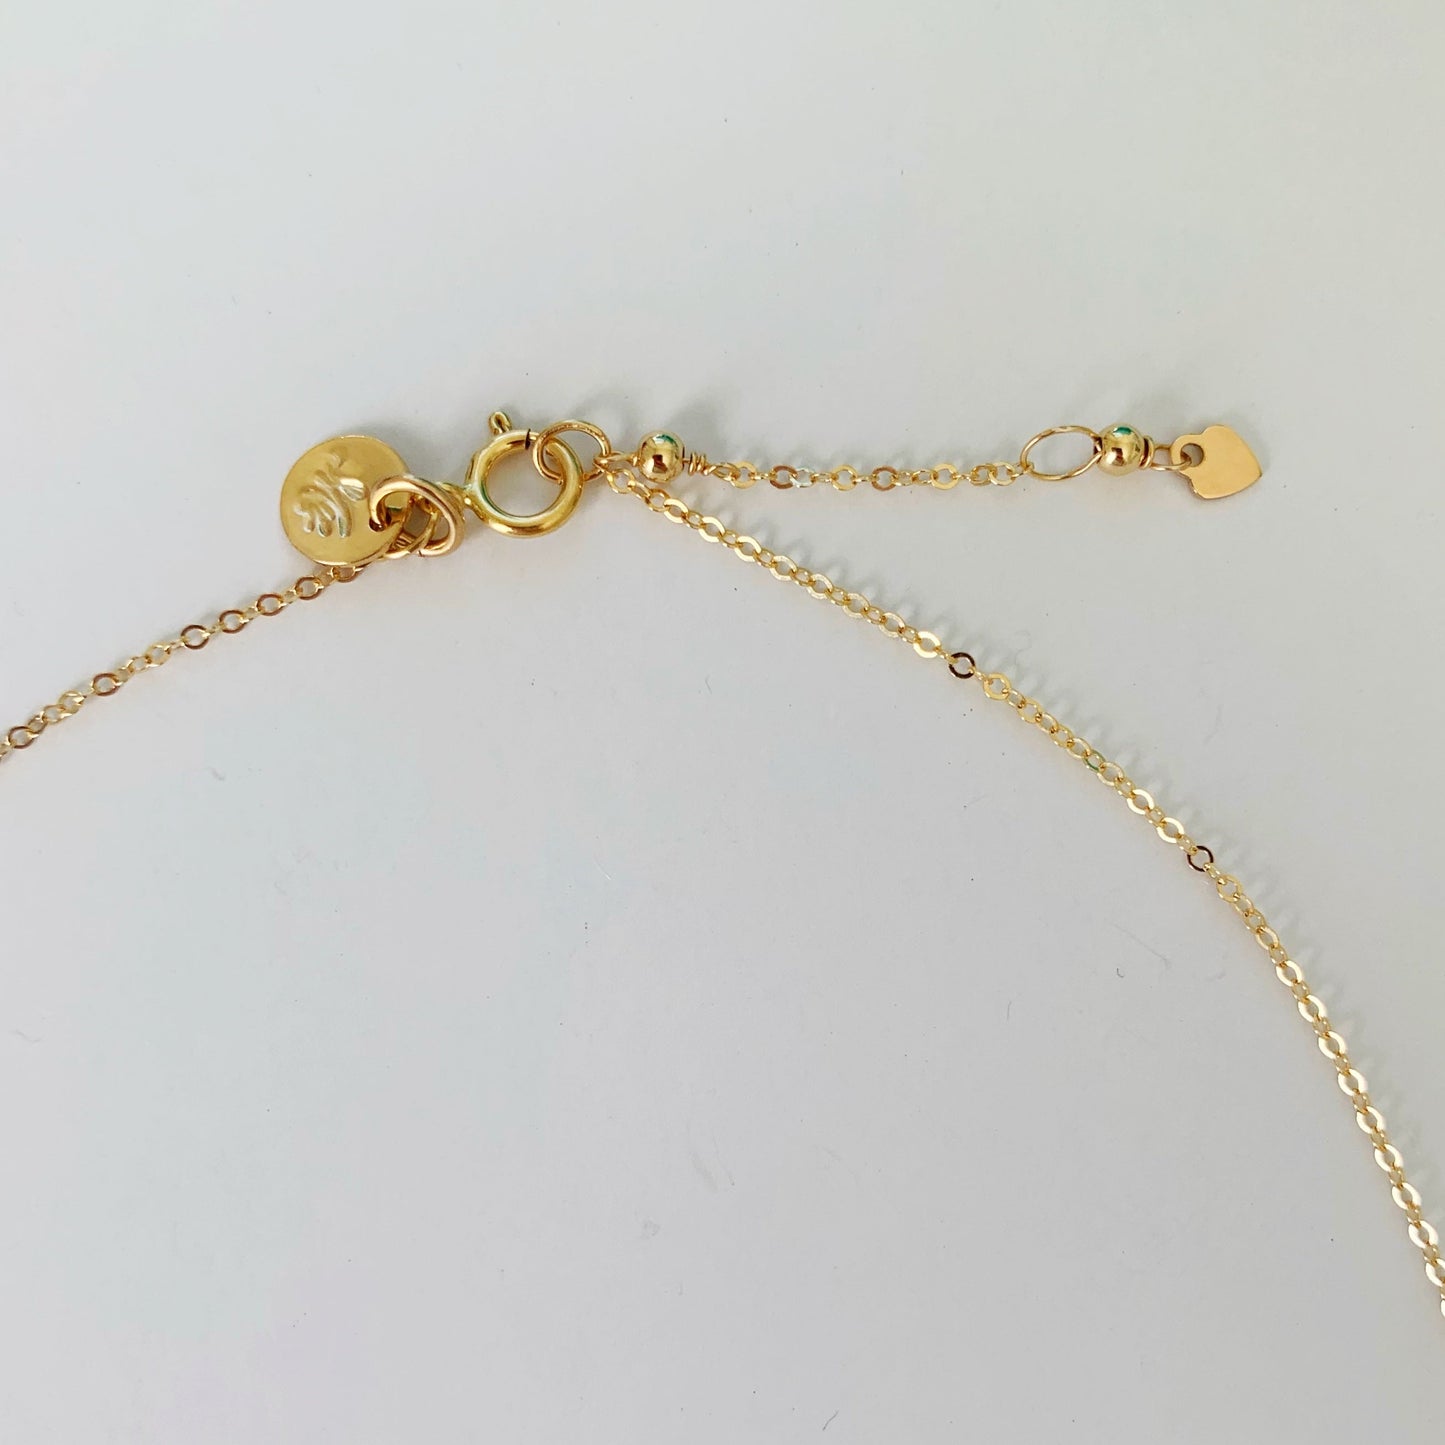 The sanibel necklace has a spring ring clasp and 1" extender chain at the back in 14k gold filled. pictured here on a white surface